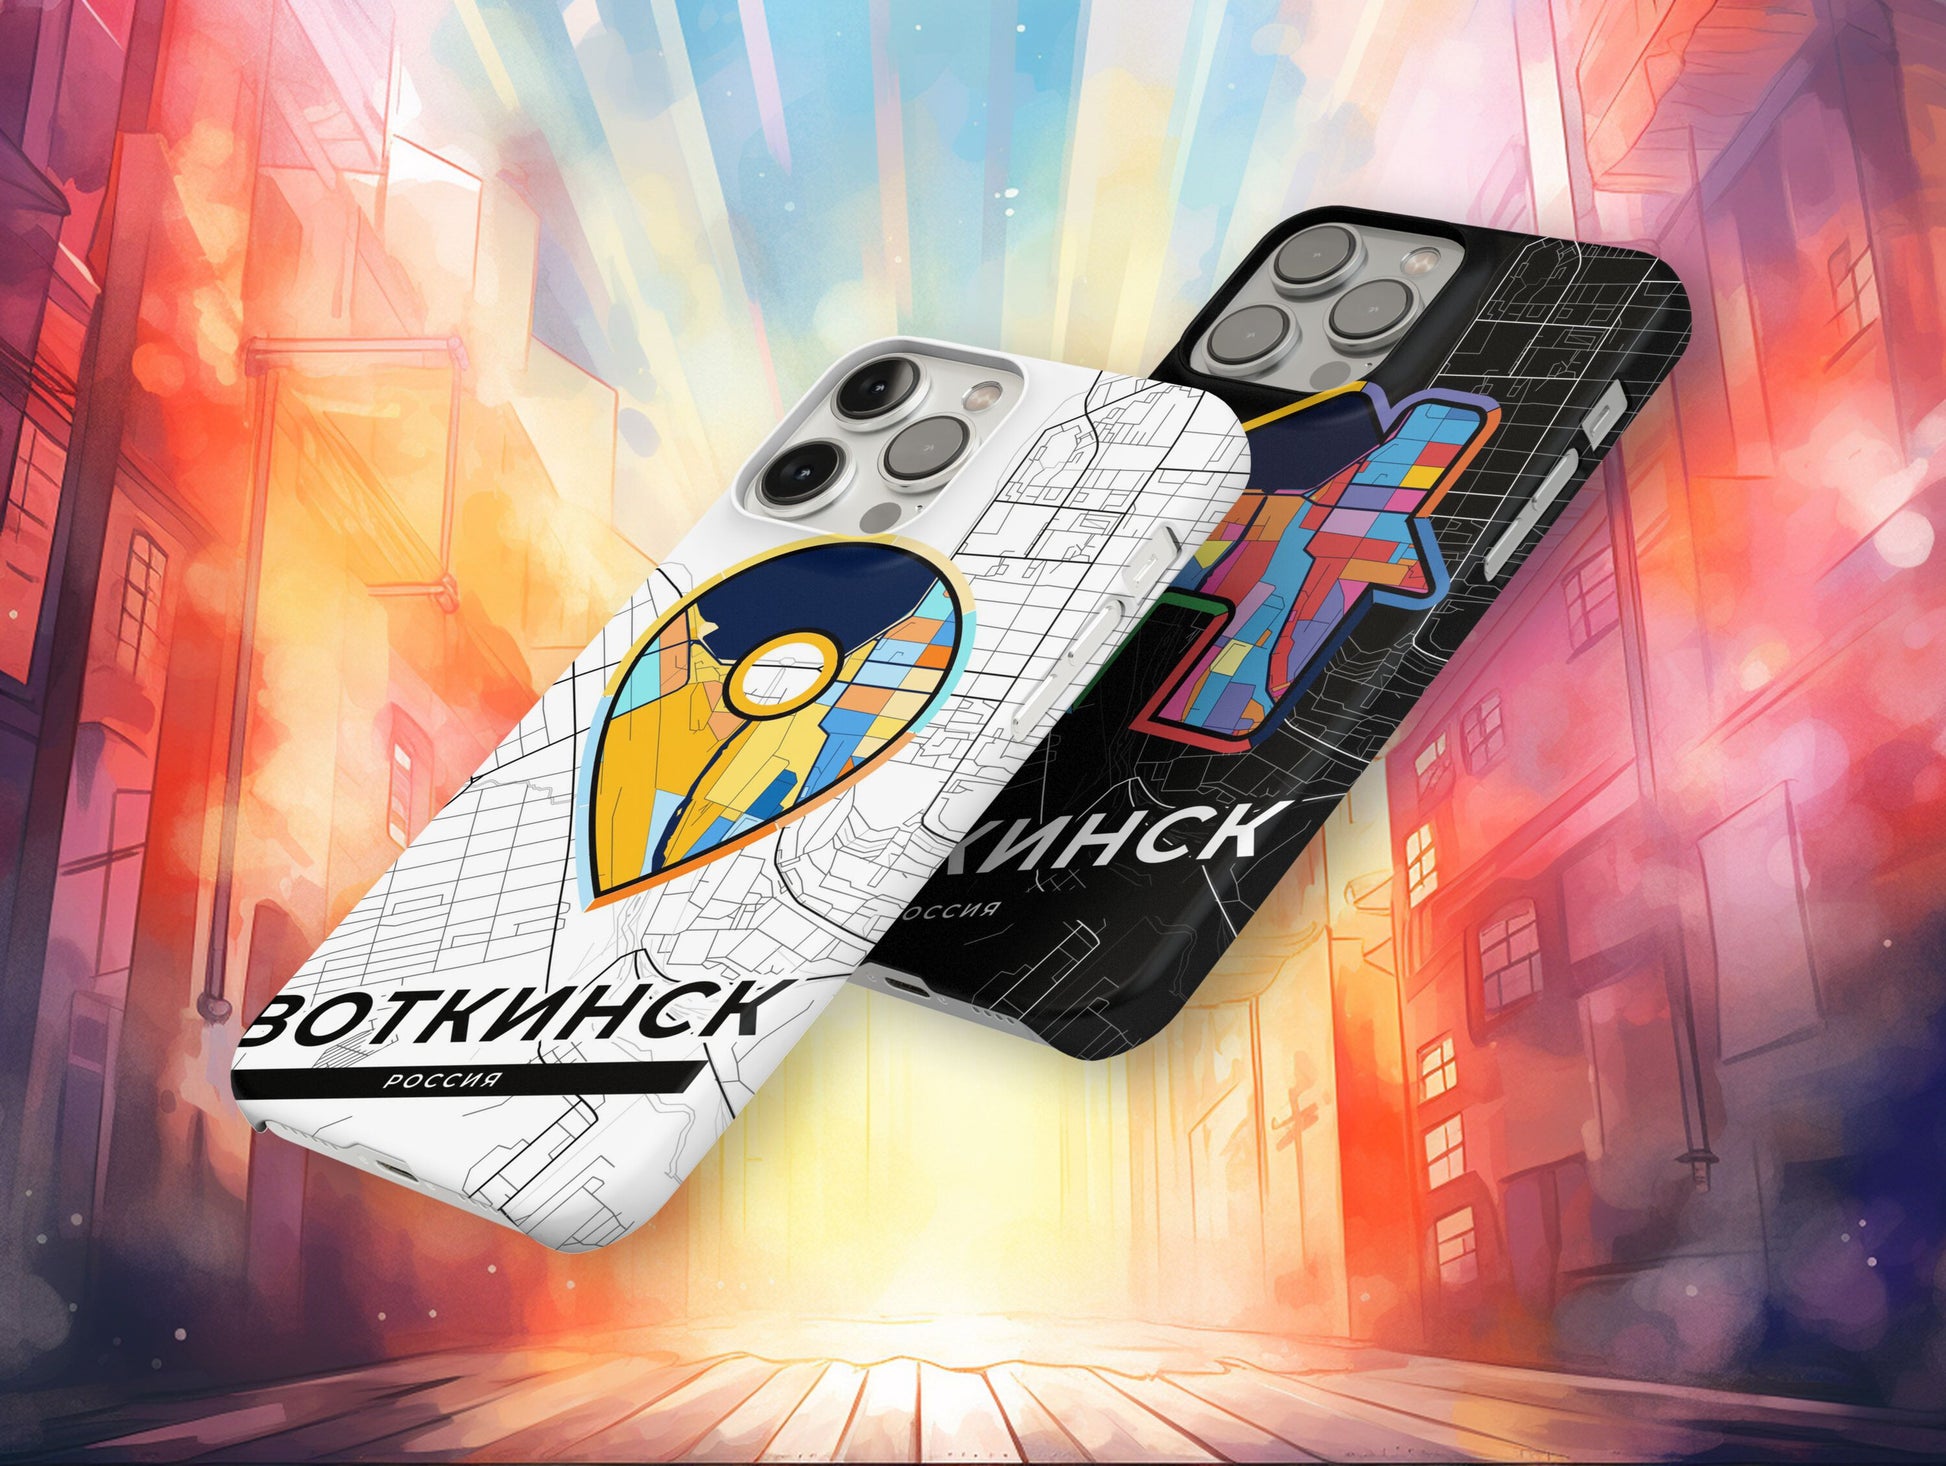 Votkinsk Russia slim phone case with colorful icon